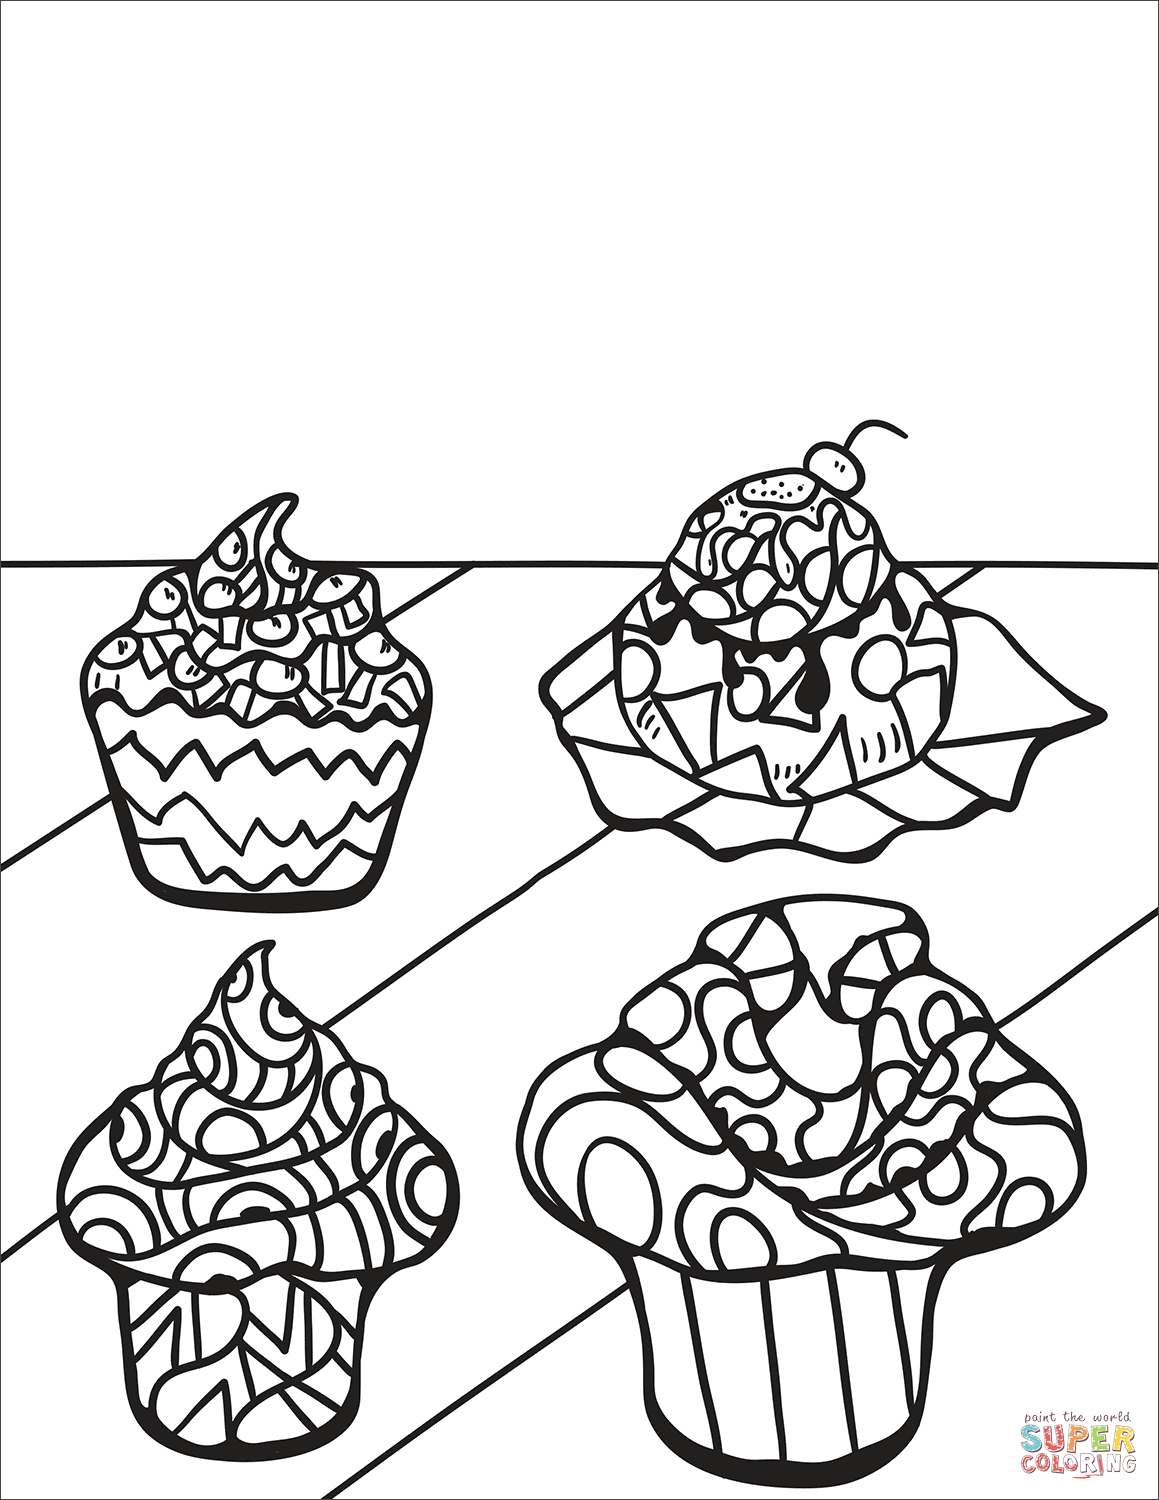 Zentangle cupcakes-and muffins